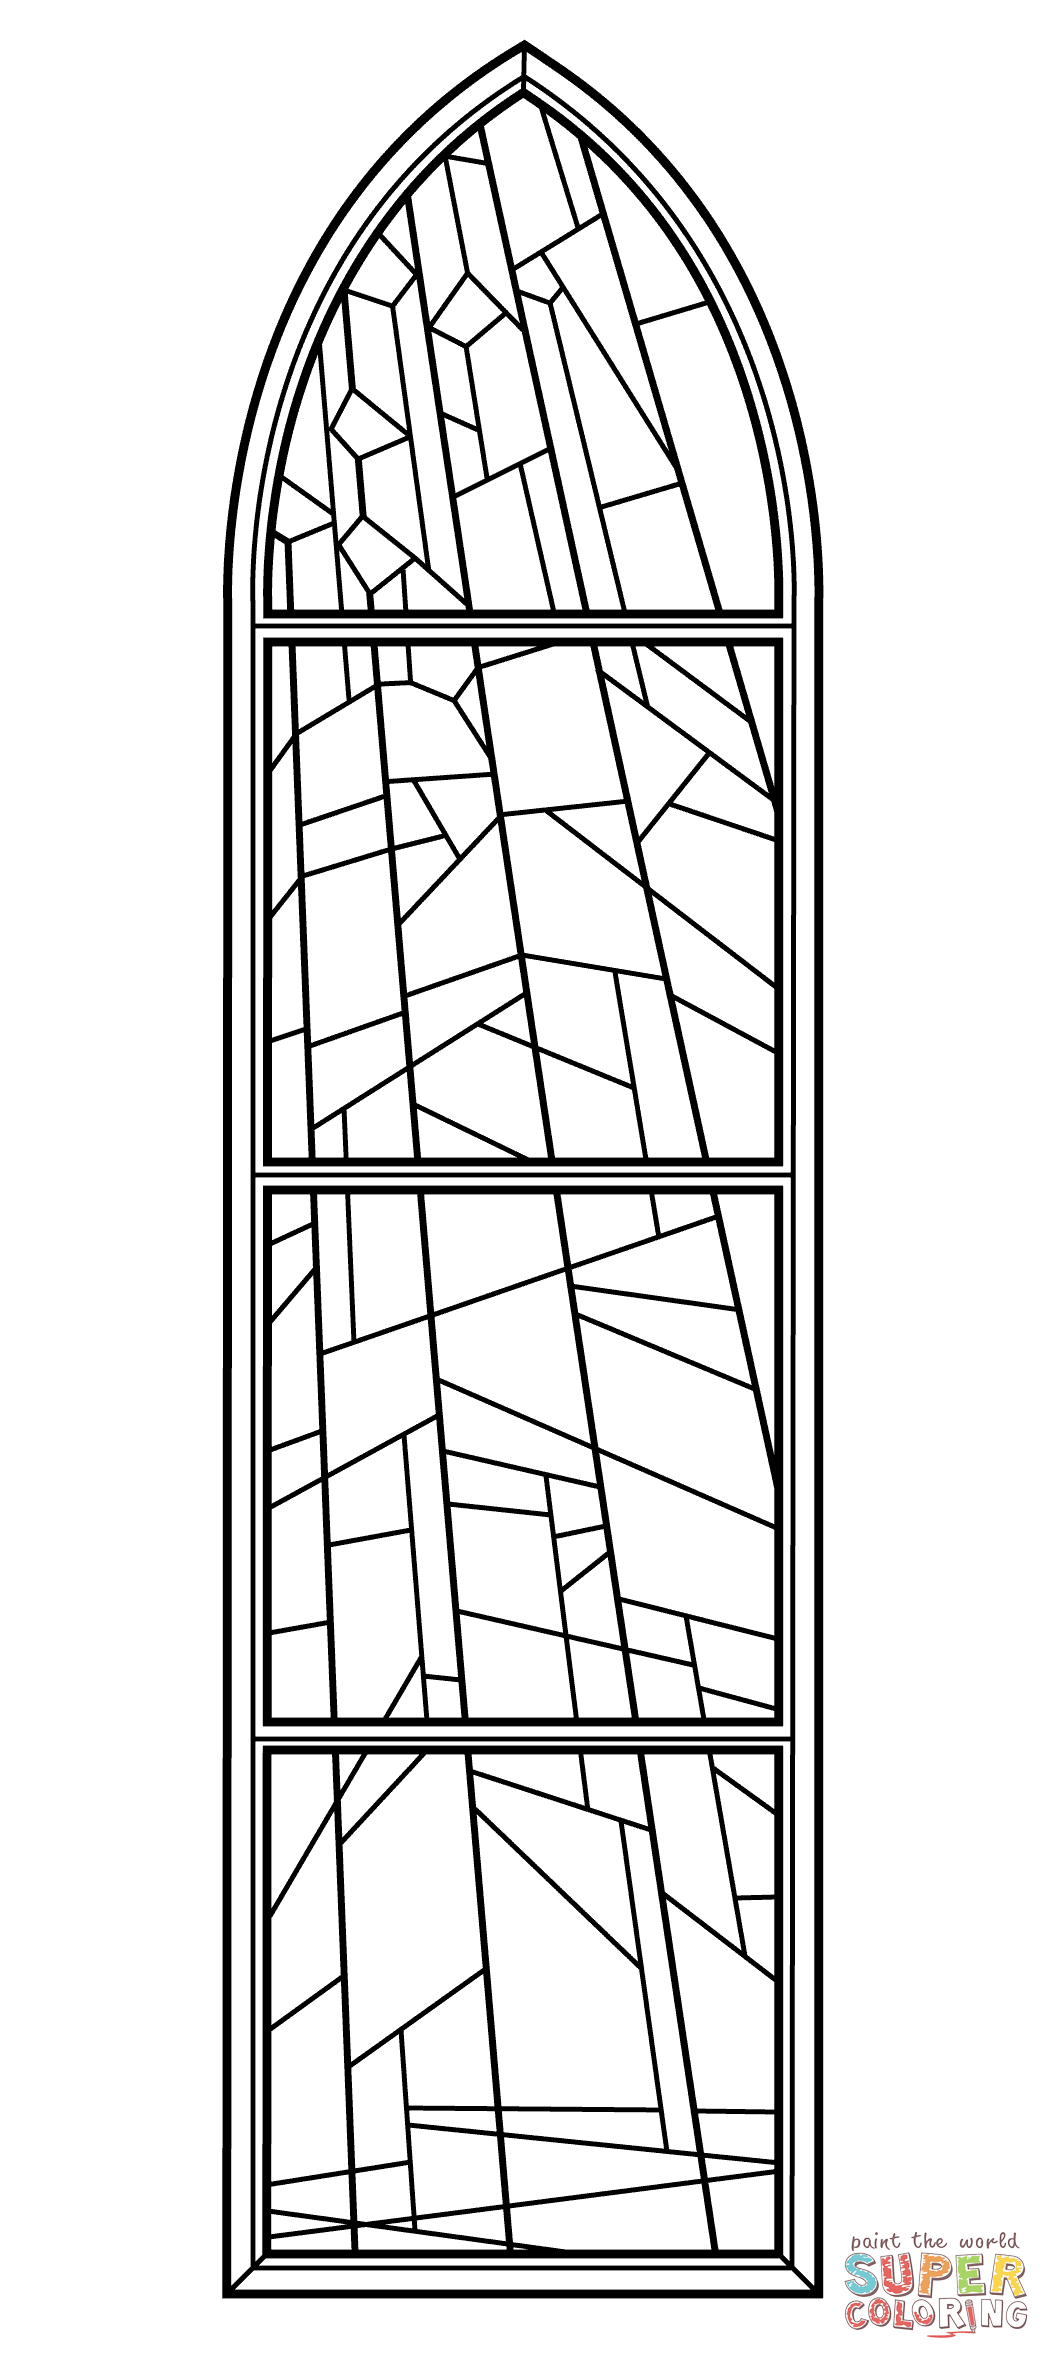 Stained Glass Window from Anglican Church coloring page | Free ...